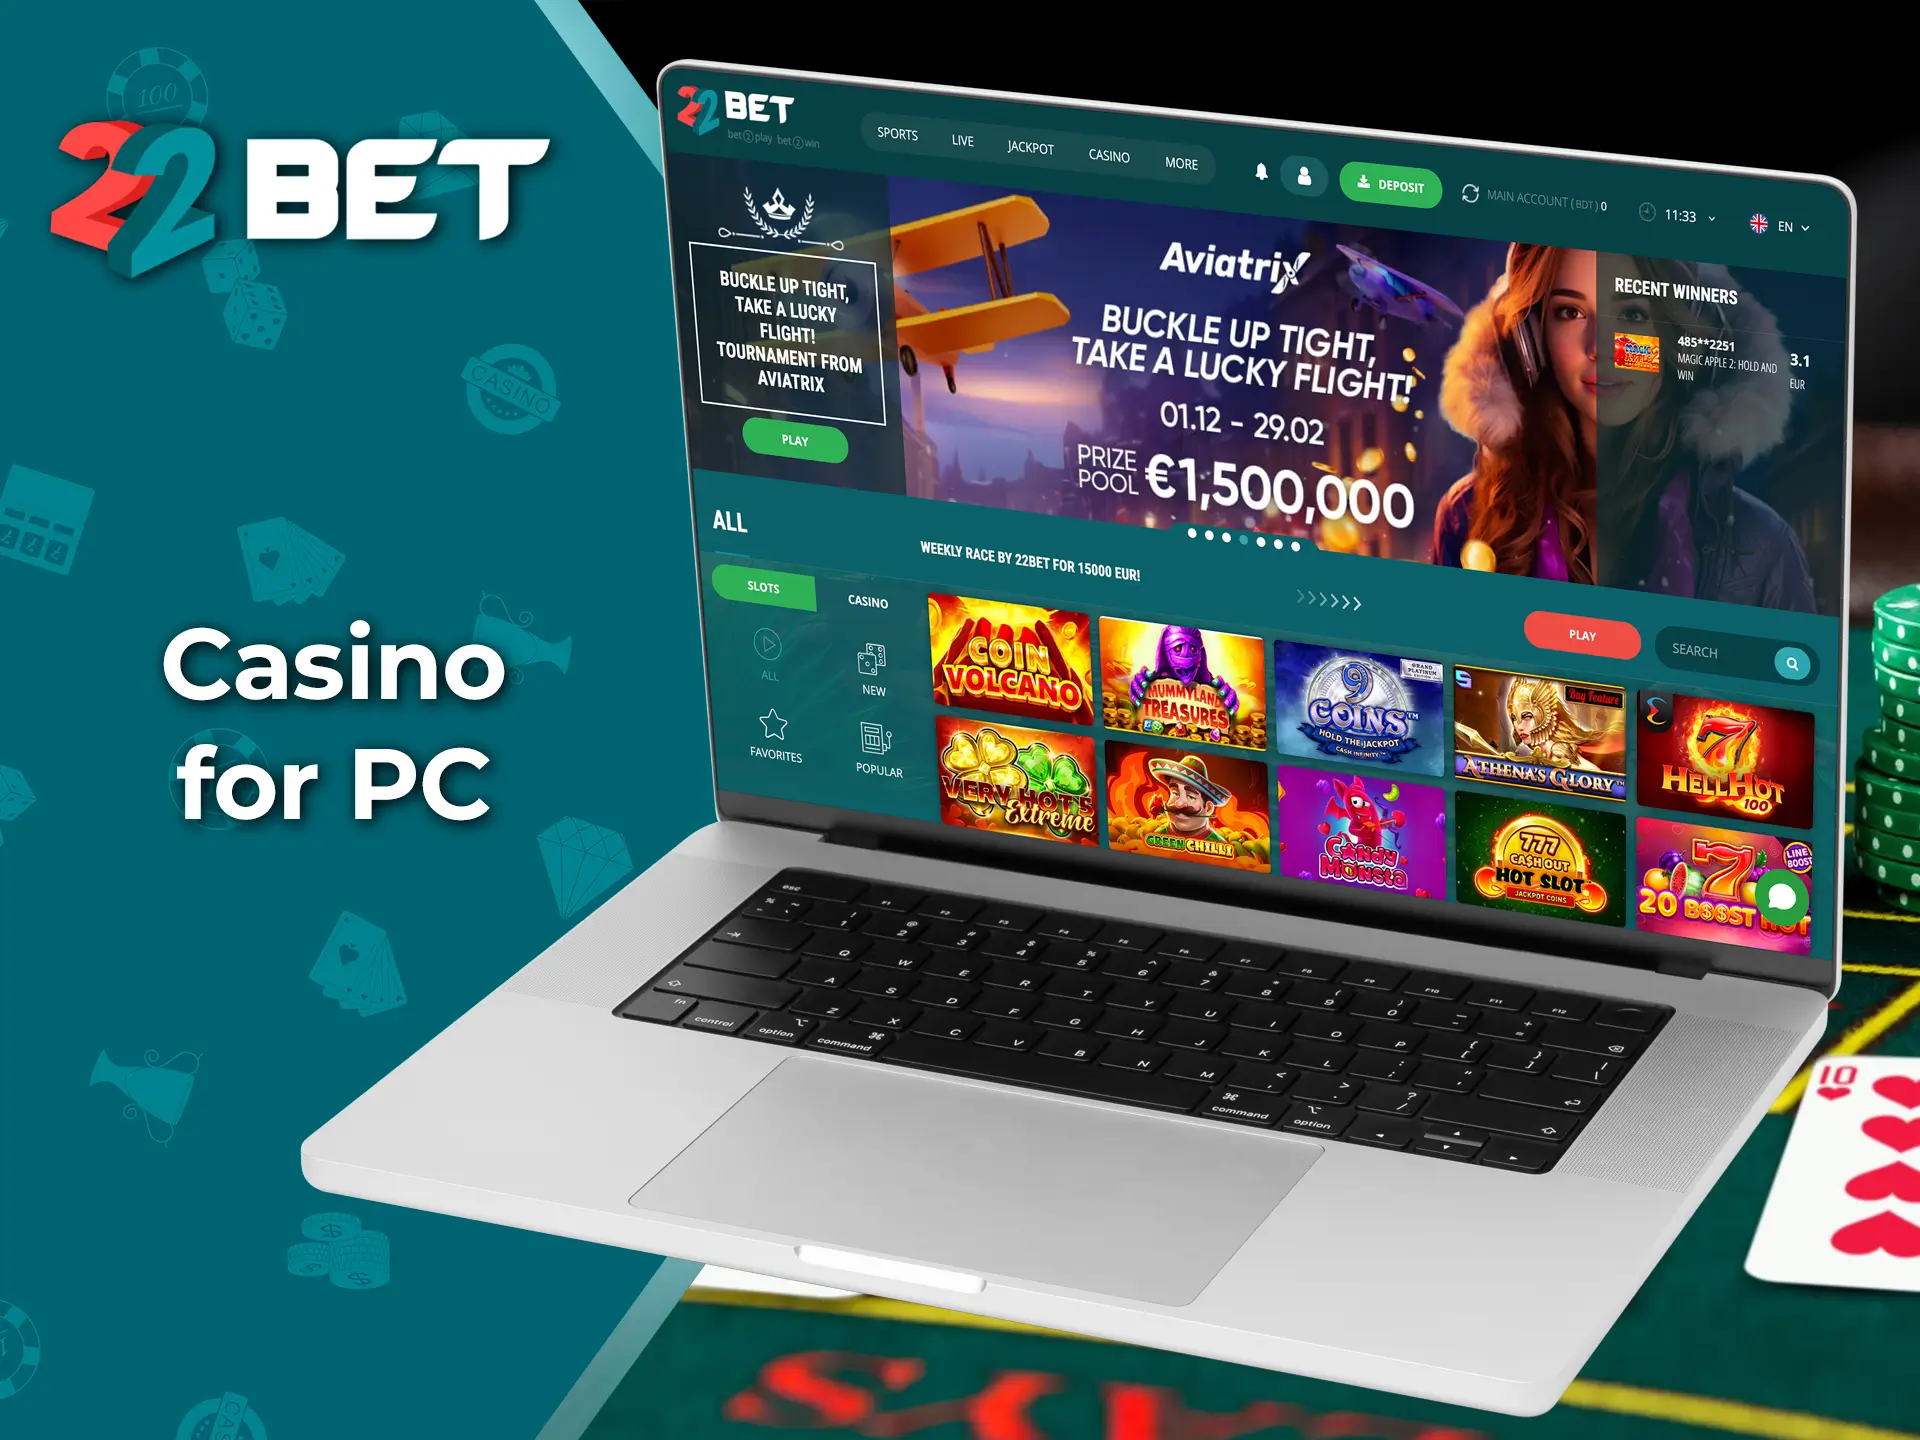 Use Bet22 Casino from your personal computer to get the most out of your gaming experience.